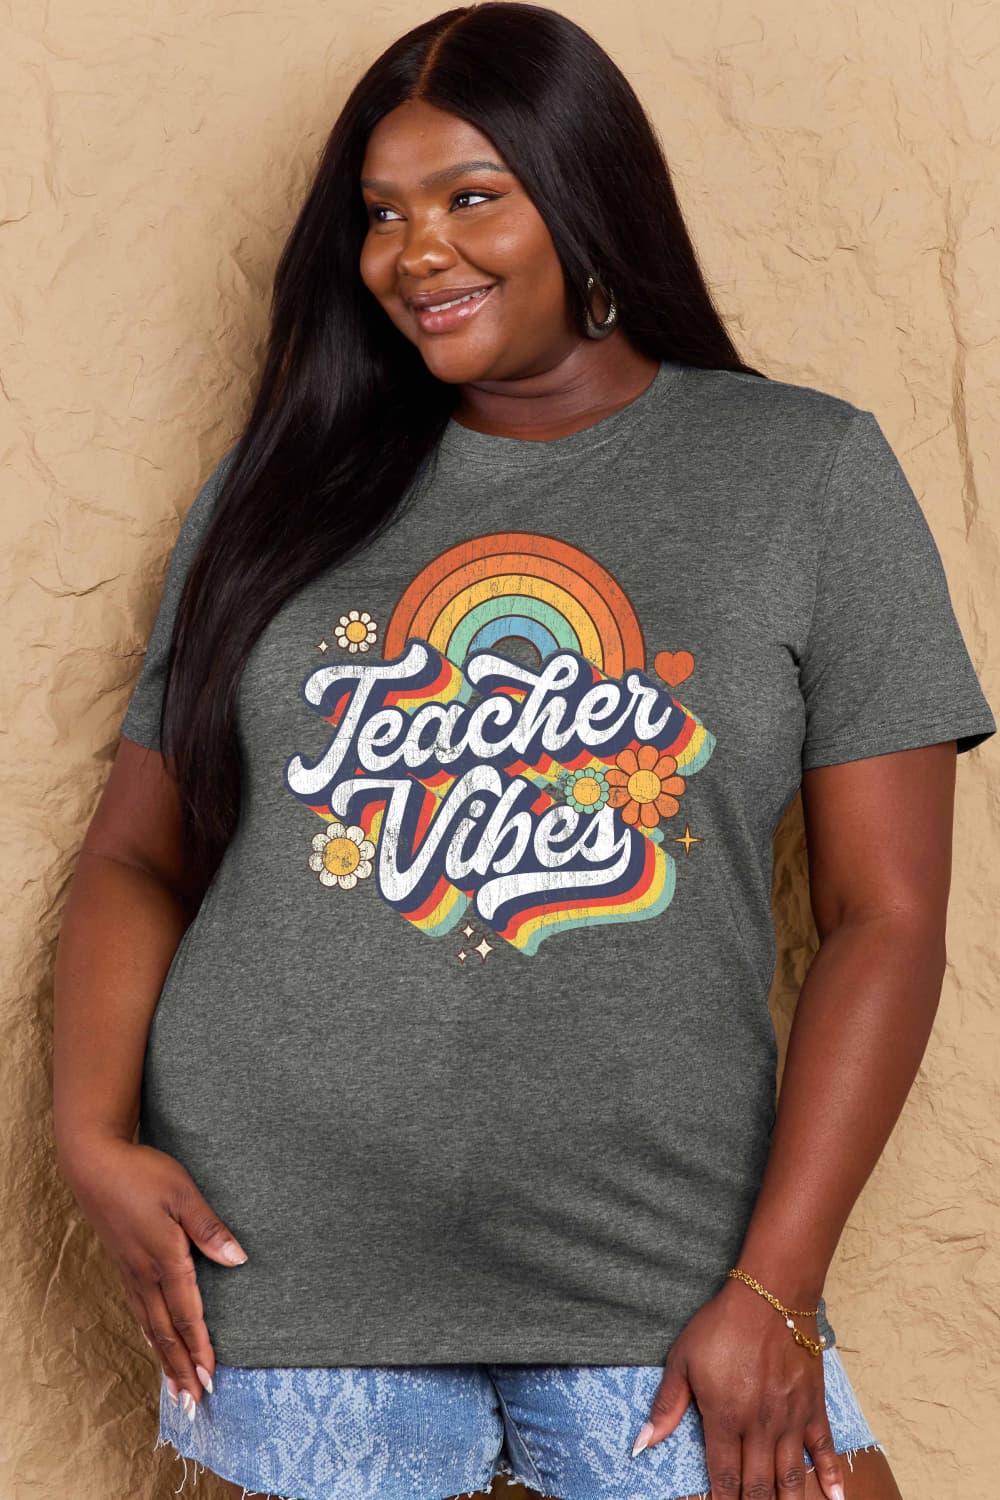 TEACHER VIBES Graphic Cotton T-Shirt - Mythical Kitty Boutique